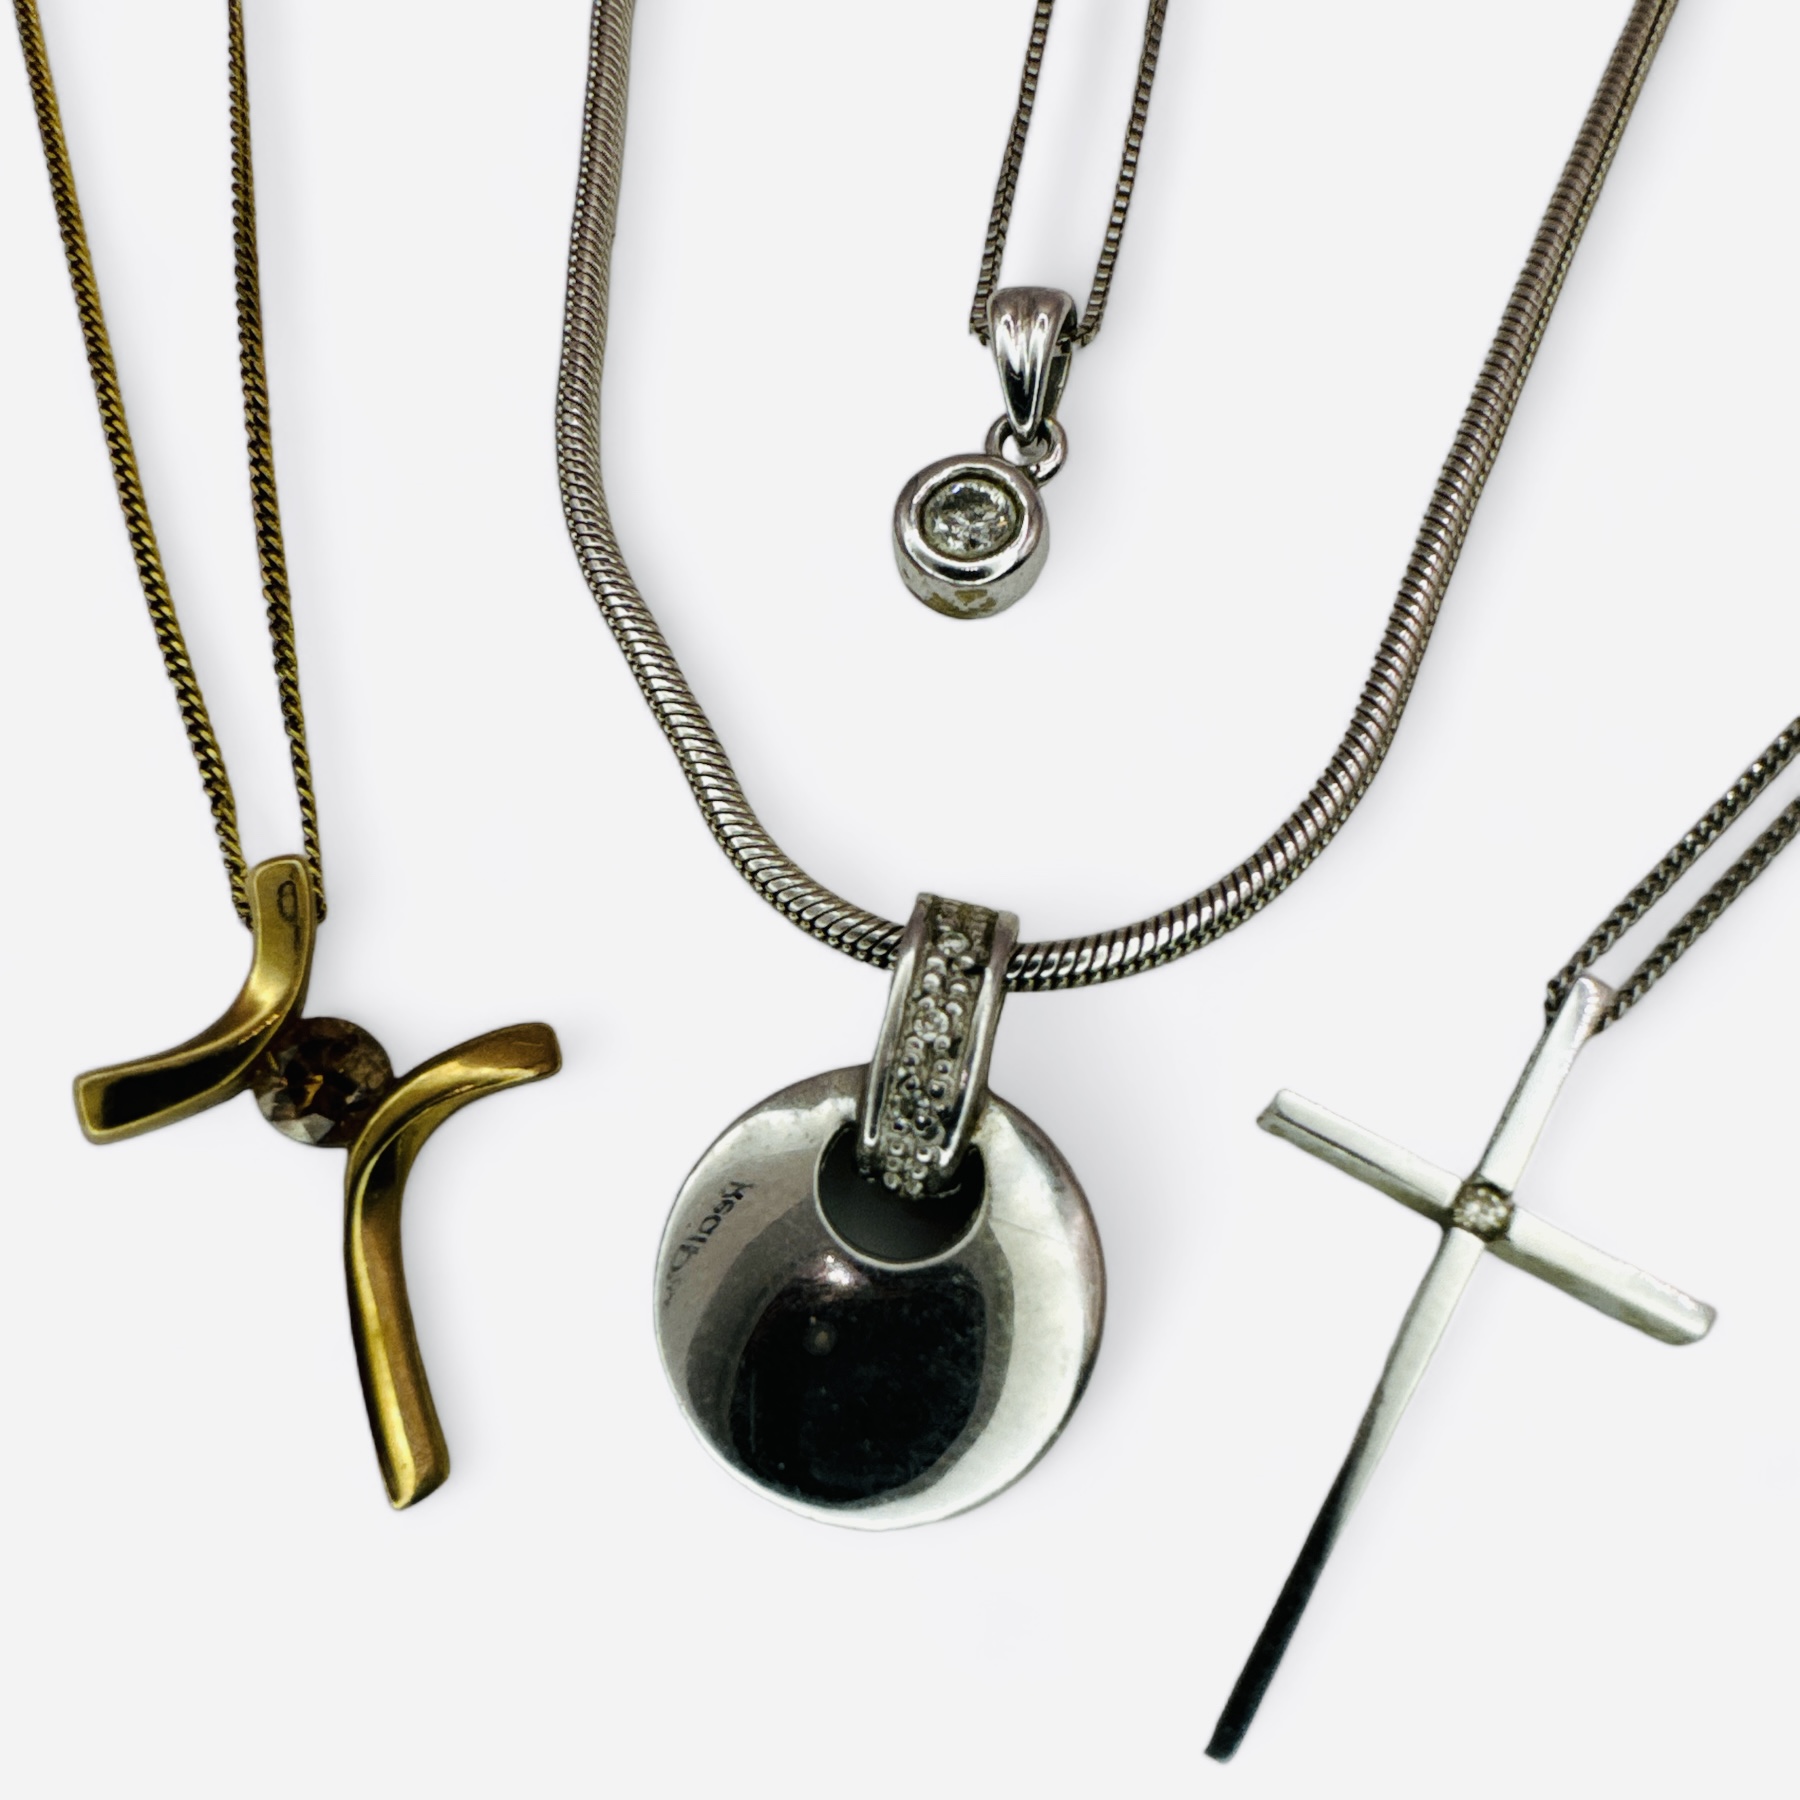 A collection of four 9ct gold diamond set pendants and chains. Featuring a bezel set round brilliant